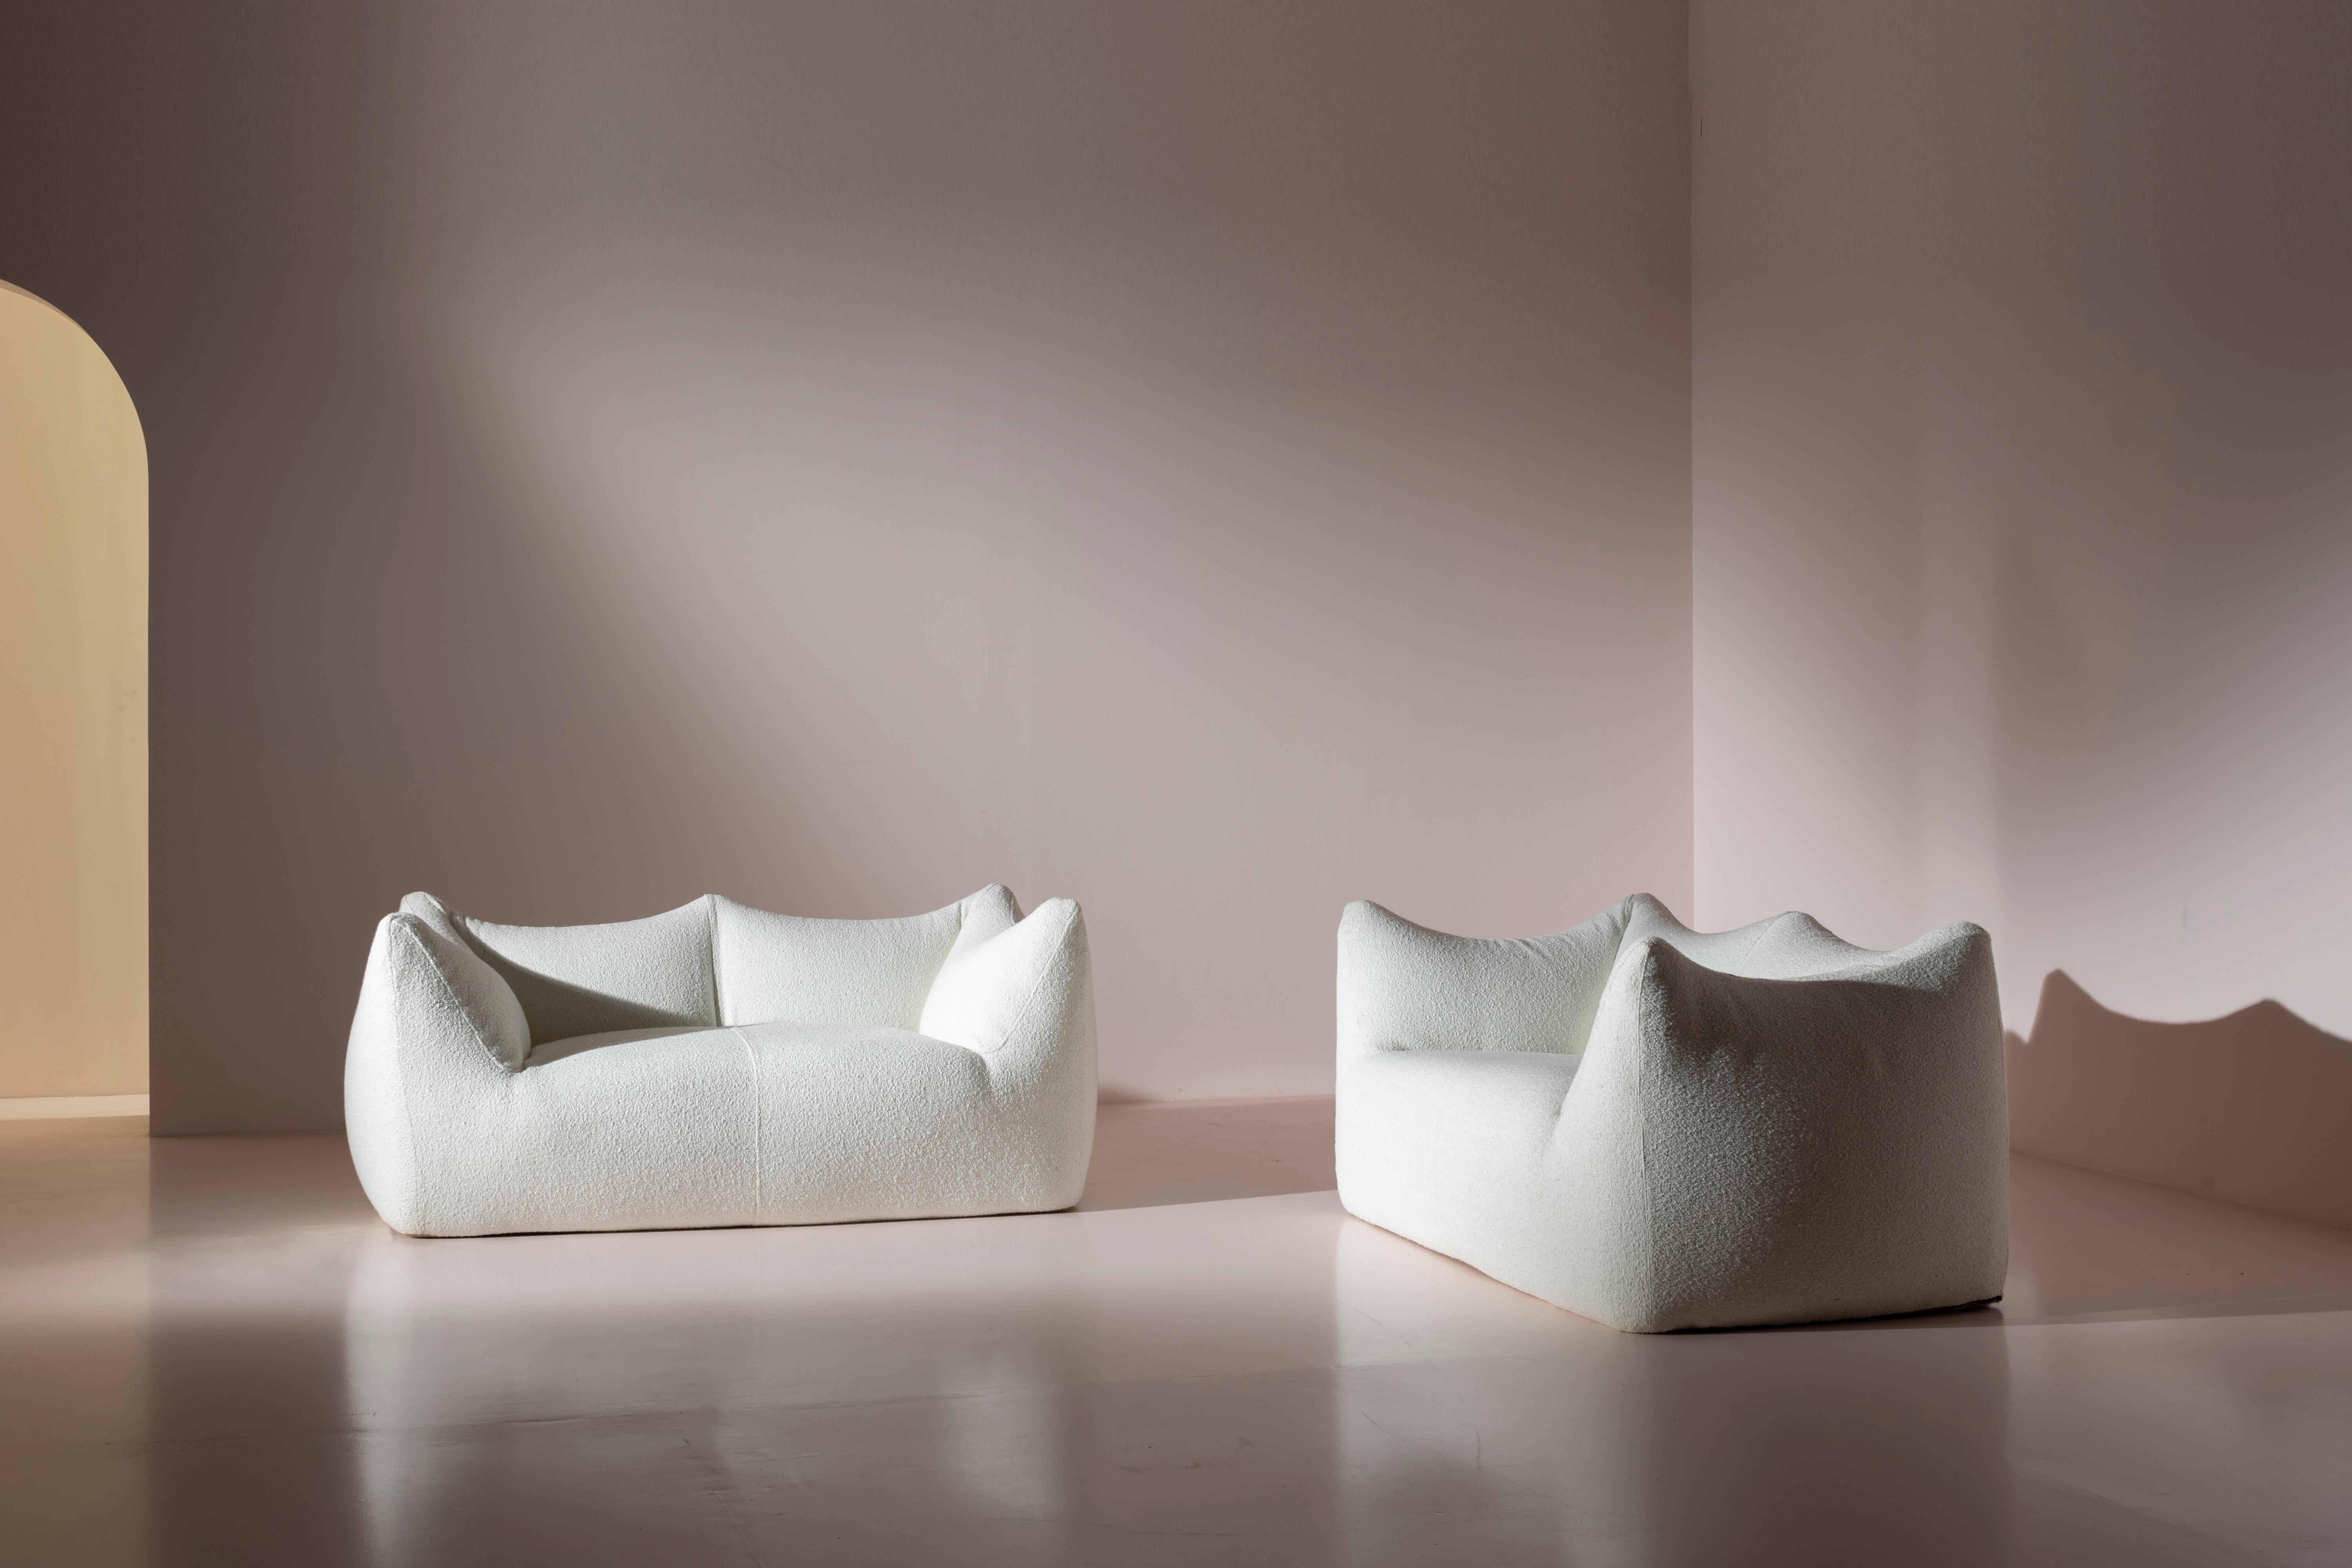 Pair of fabric sofas, from the Le Bambole series, designed by Mario Bellini in 1972, Italian production, bearing the B&B brand.

The 1970s marked a period of significant cultural and aesthetic ferment, propelling designers and architects onto